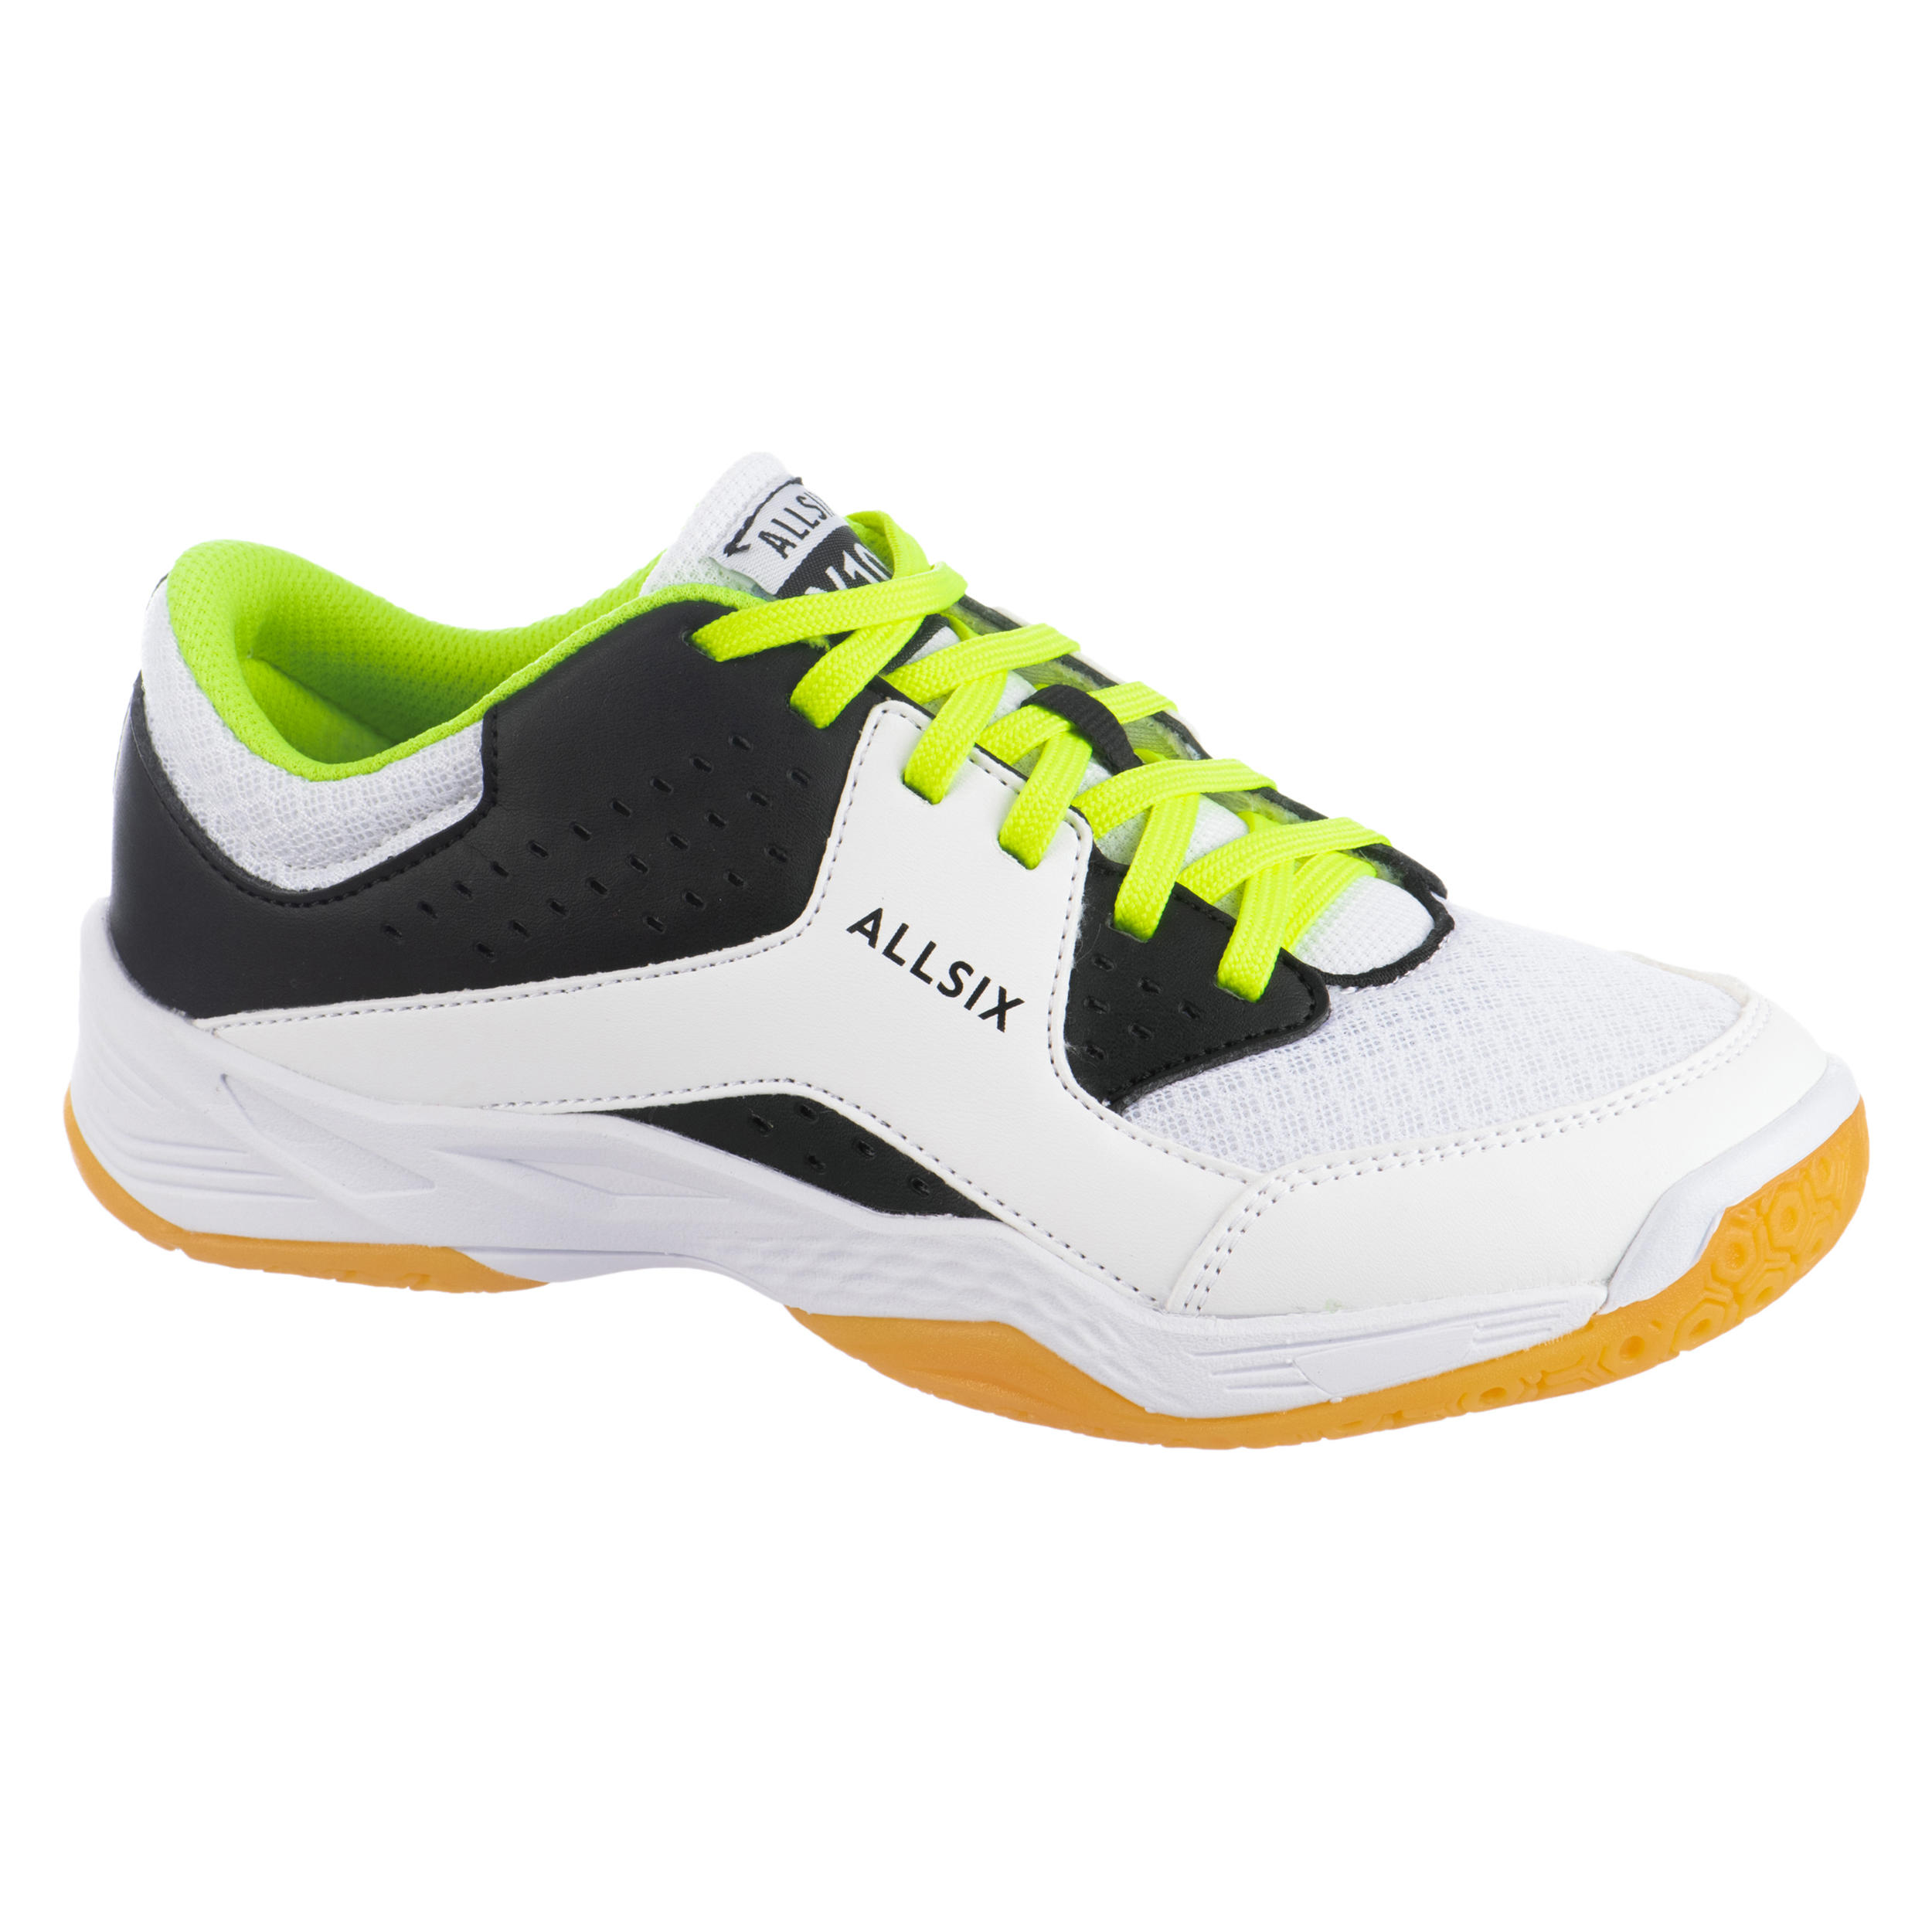 ALLSIX Kids' Volleyball Lace-Up Shoes - White/Black/Yellow